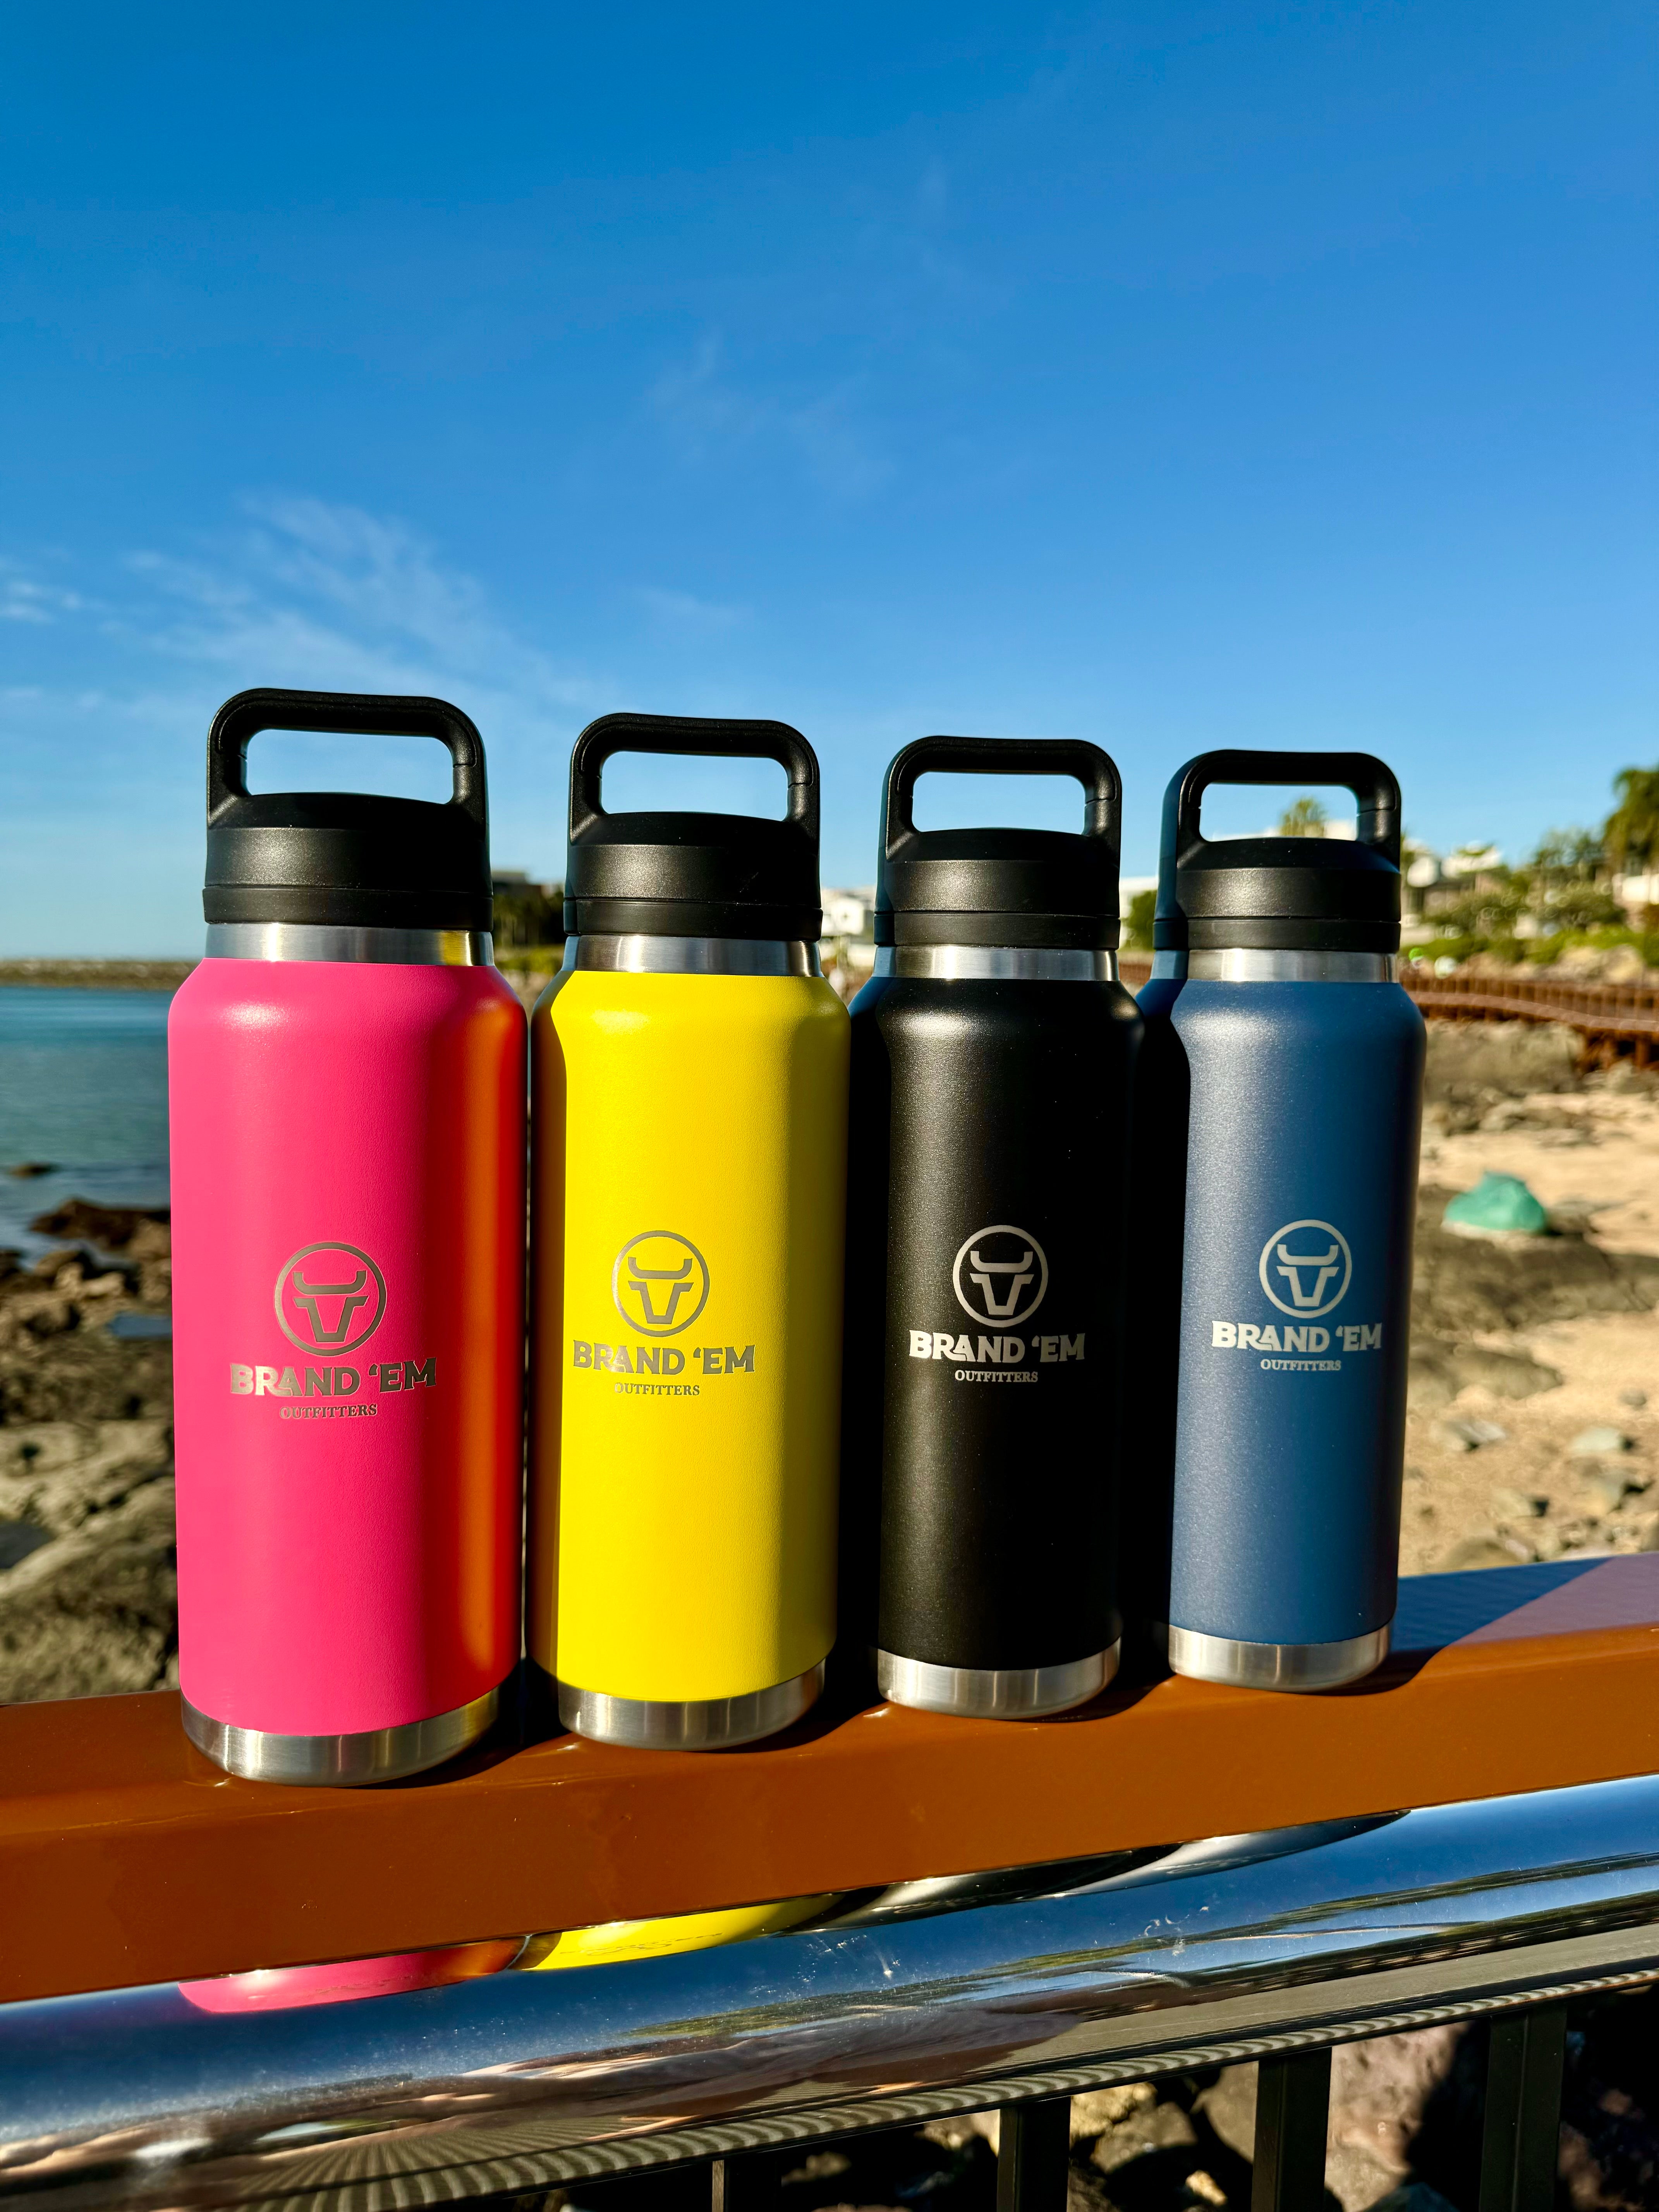 36oz (1.06L) Insulated Water Bottle